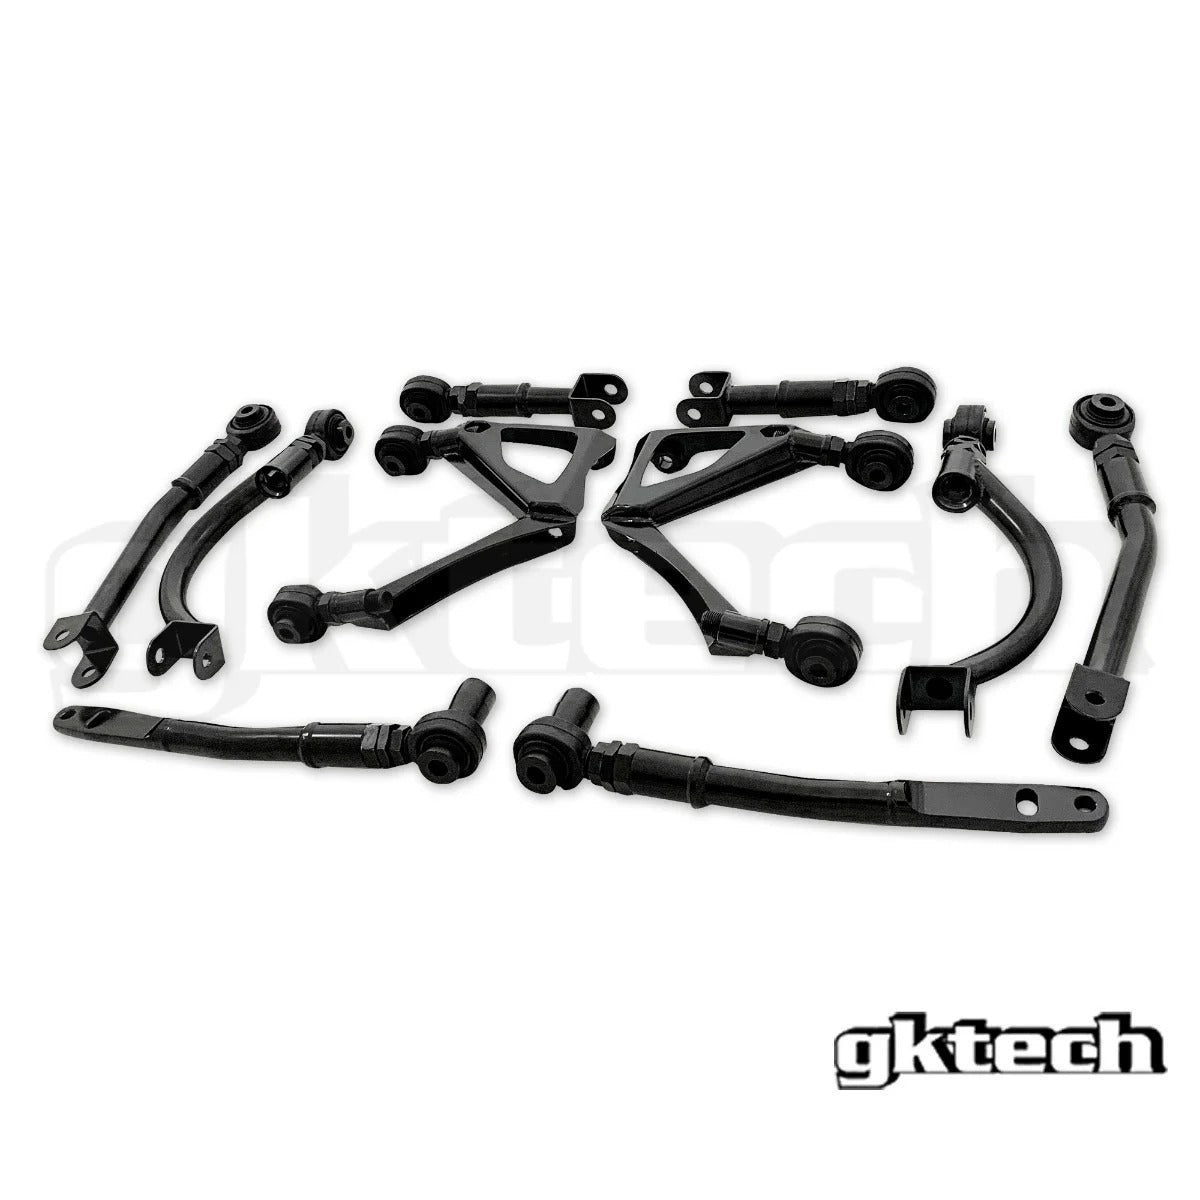 R33/R34 Skyline Suspension arm package (10% combo discount)